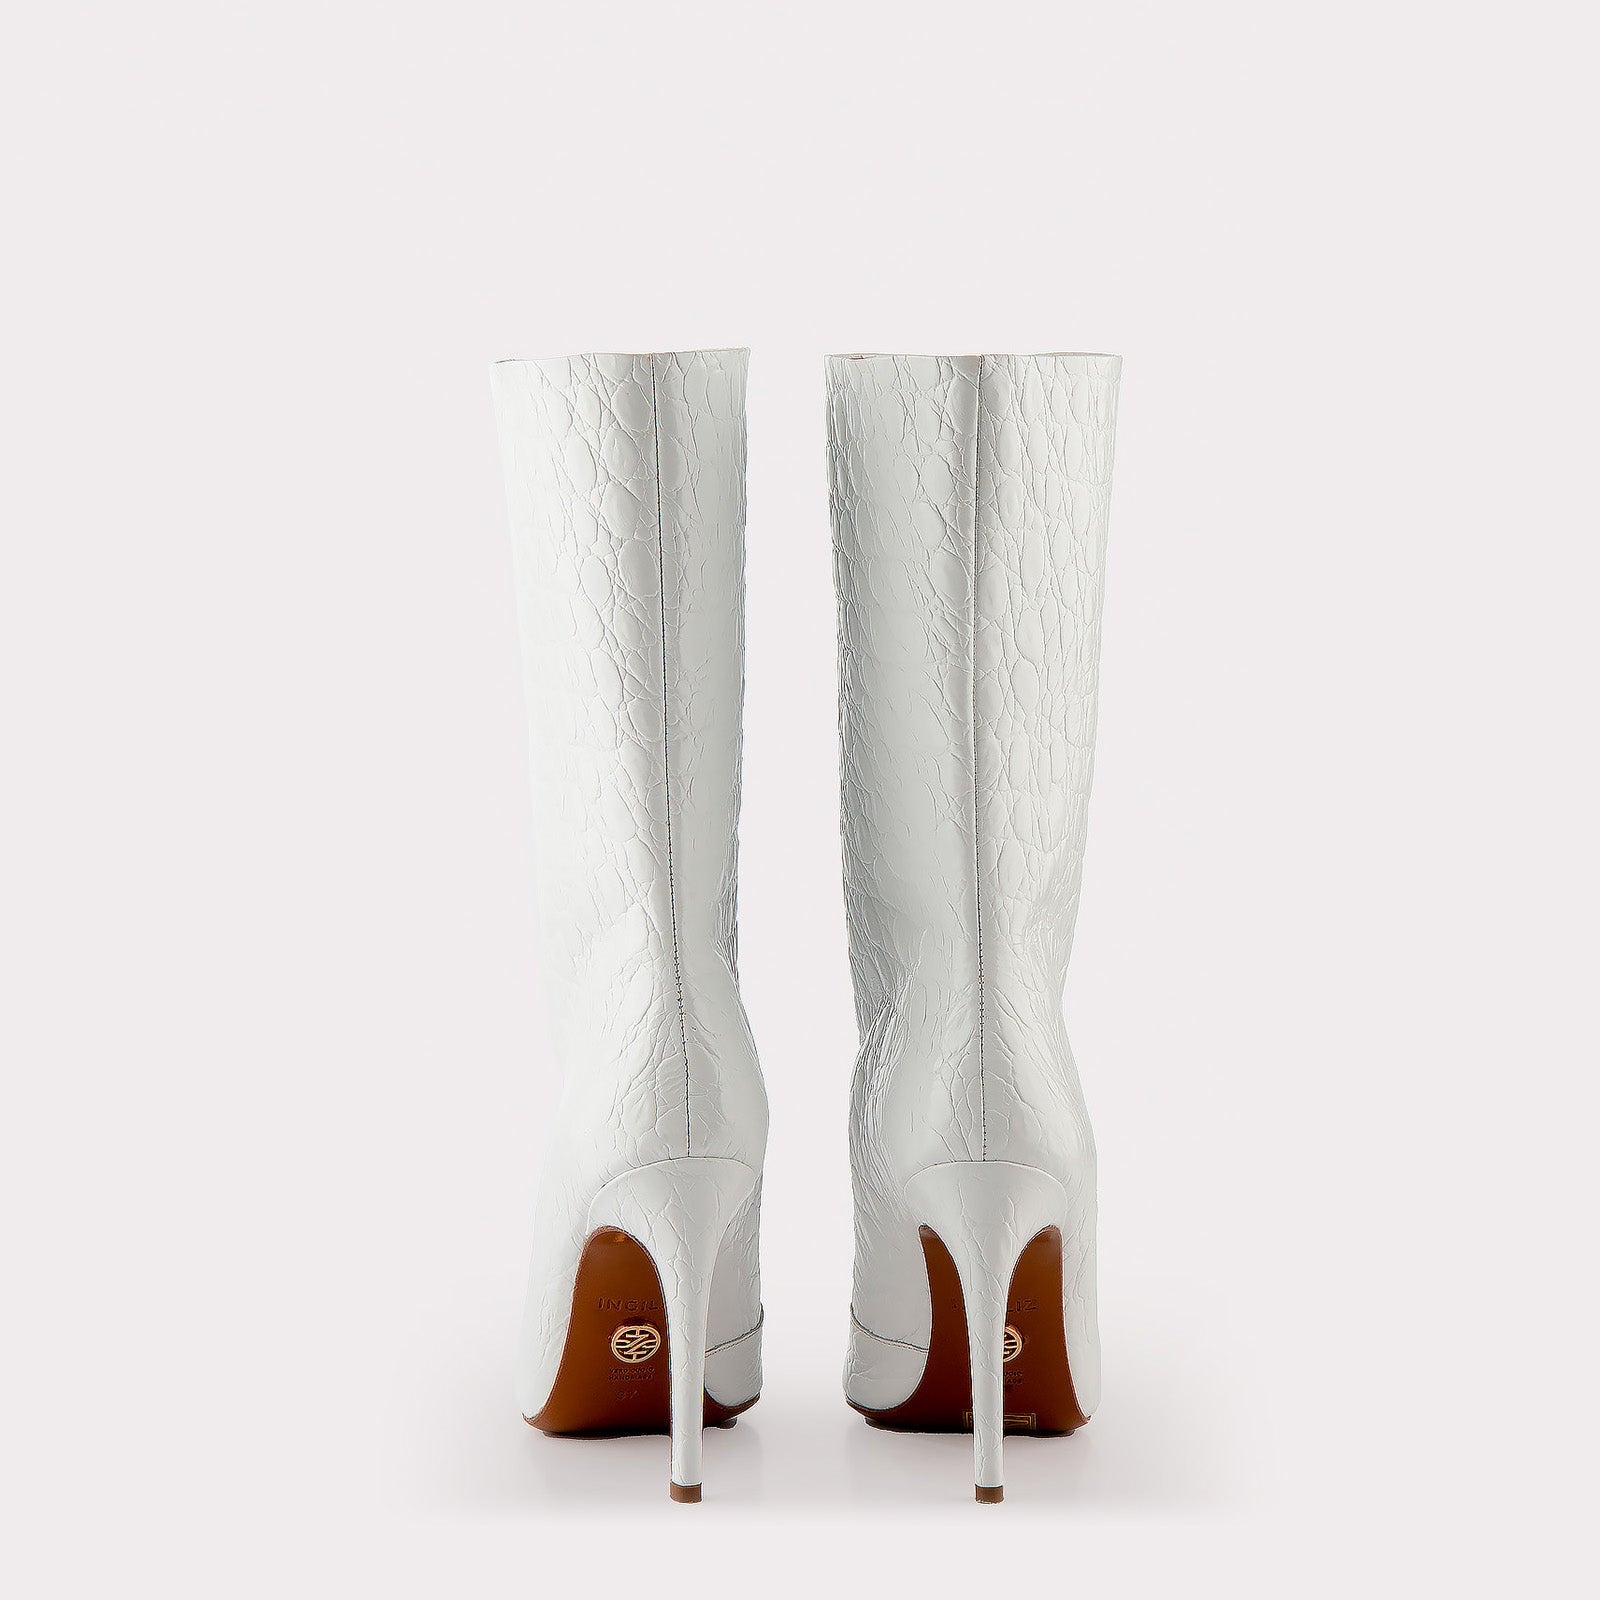 TEXTURED LEATHER BOOTS ANNIE WHITE